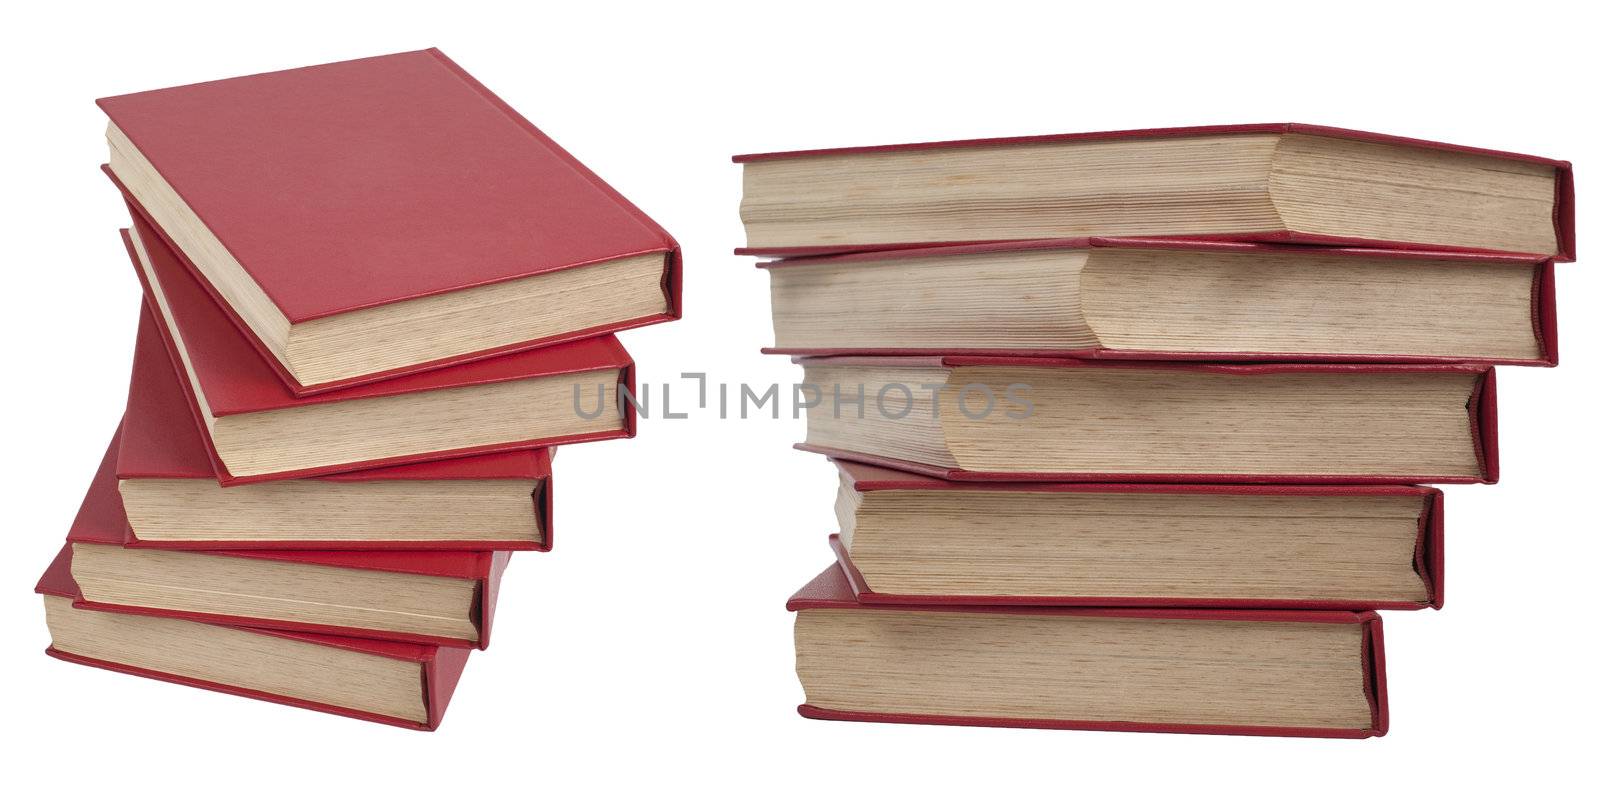 Piles of red books by homydesign